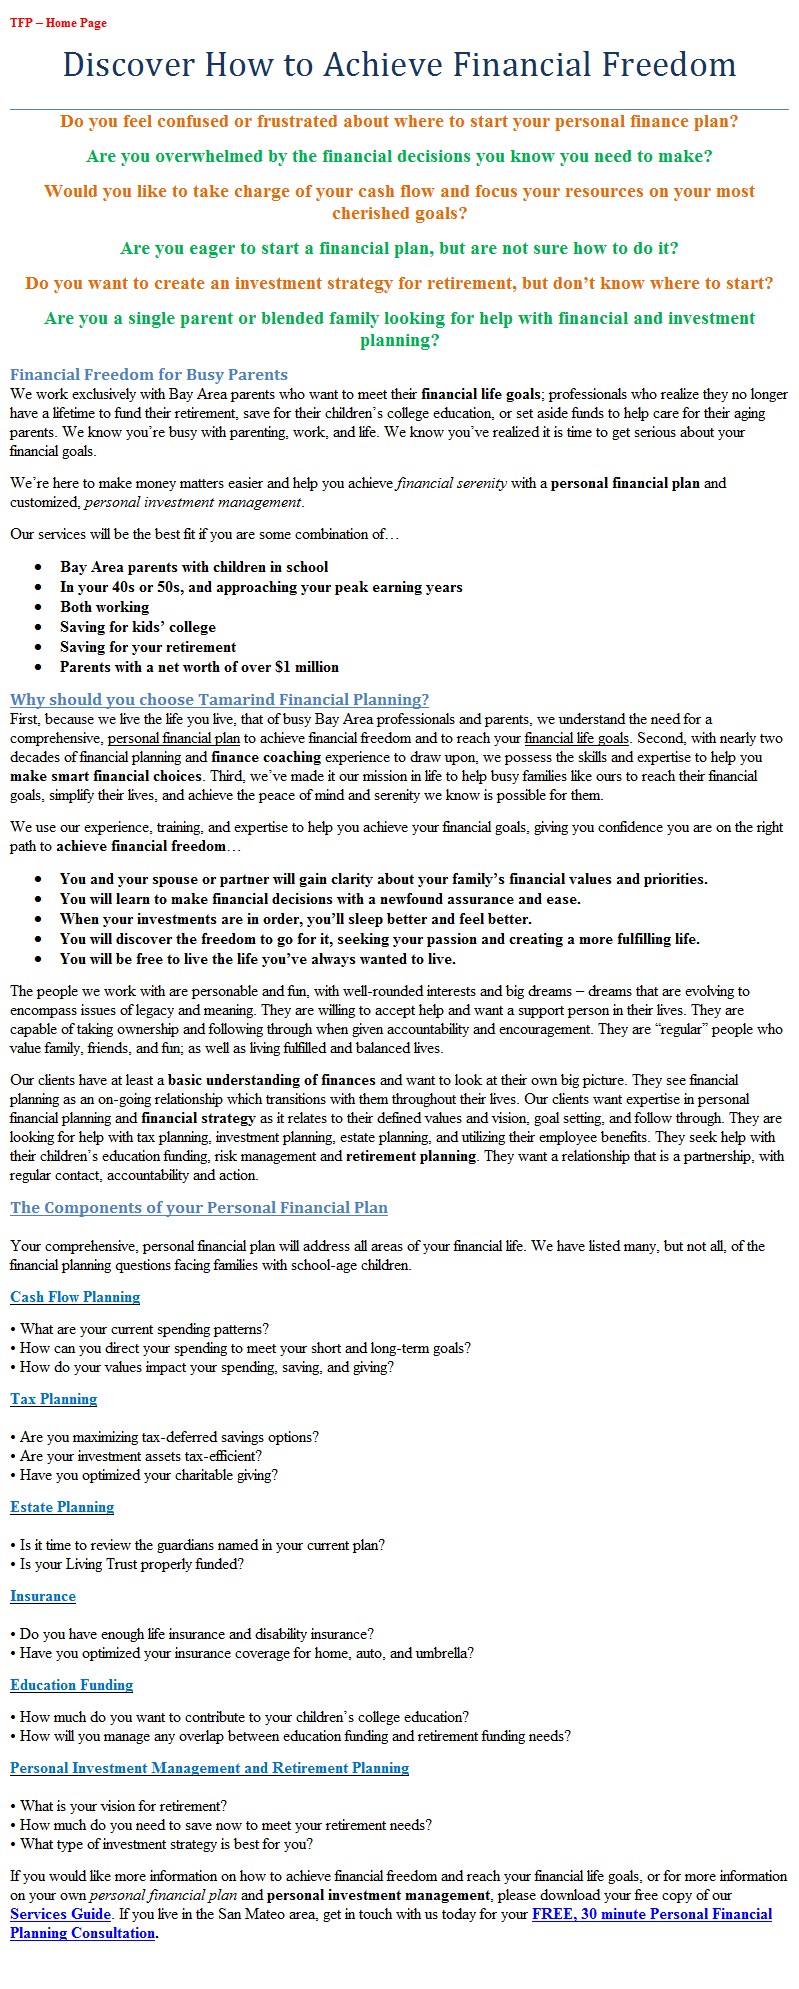 Home Page-Tamarind Financial Planning Final Draft_3